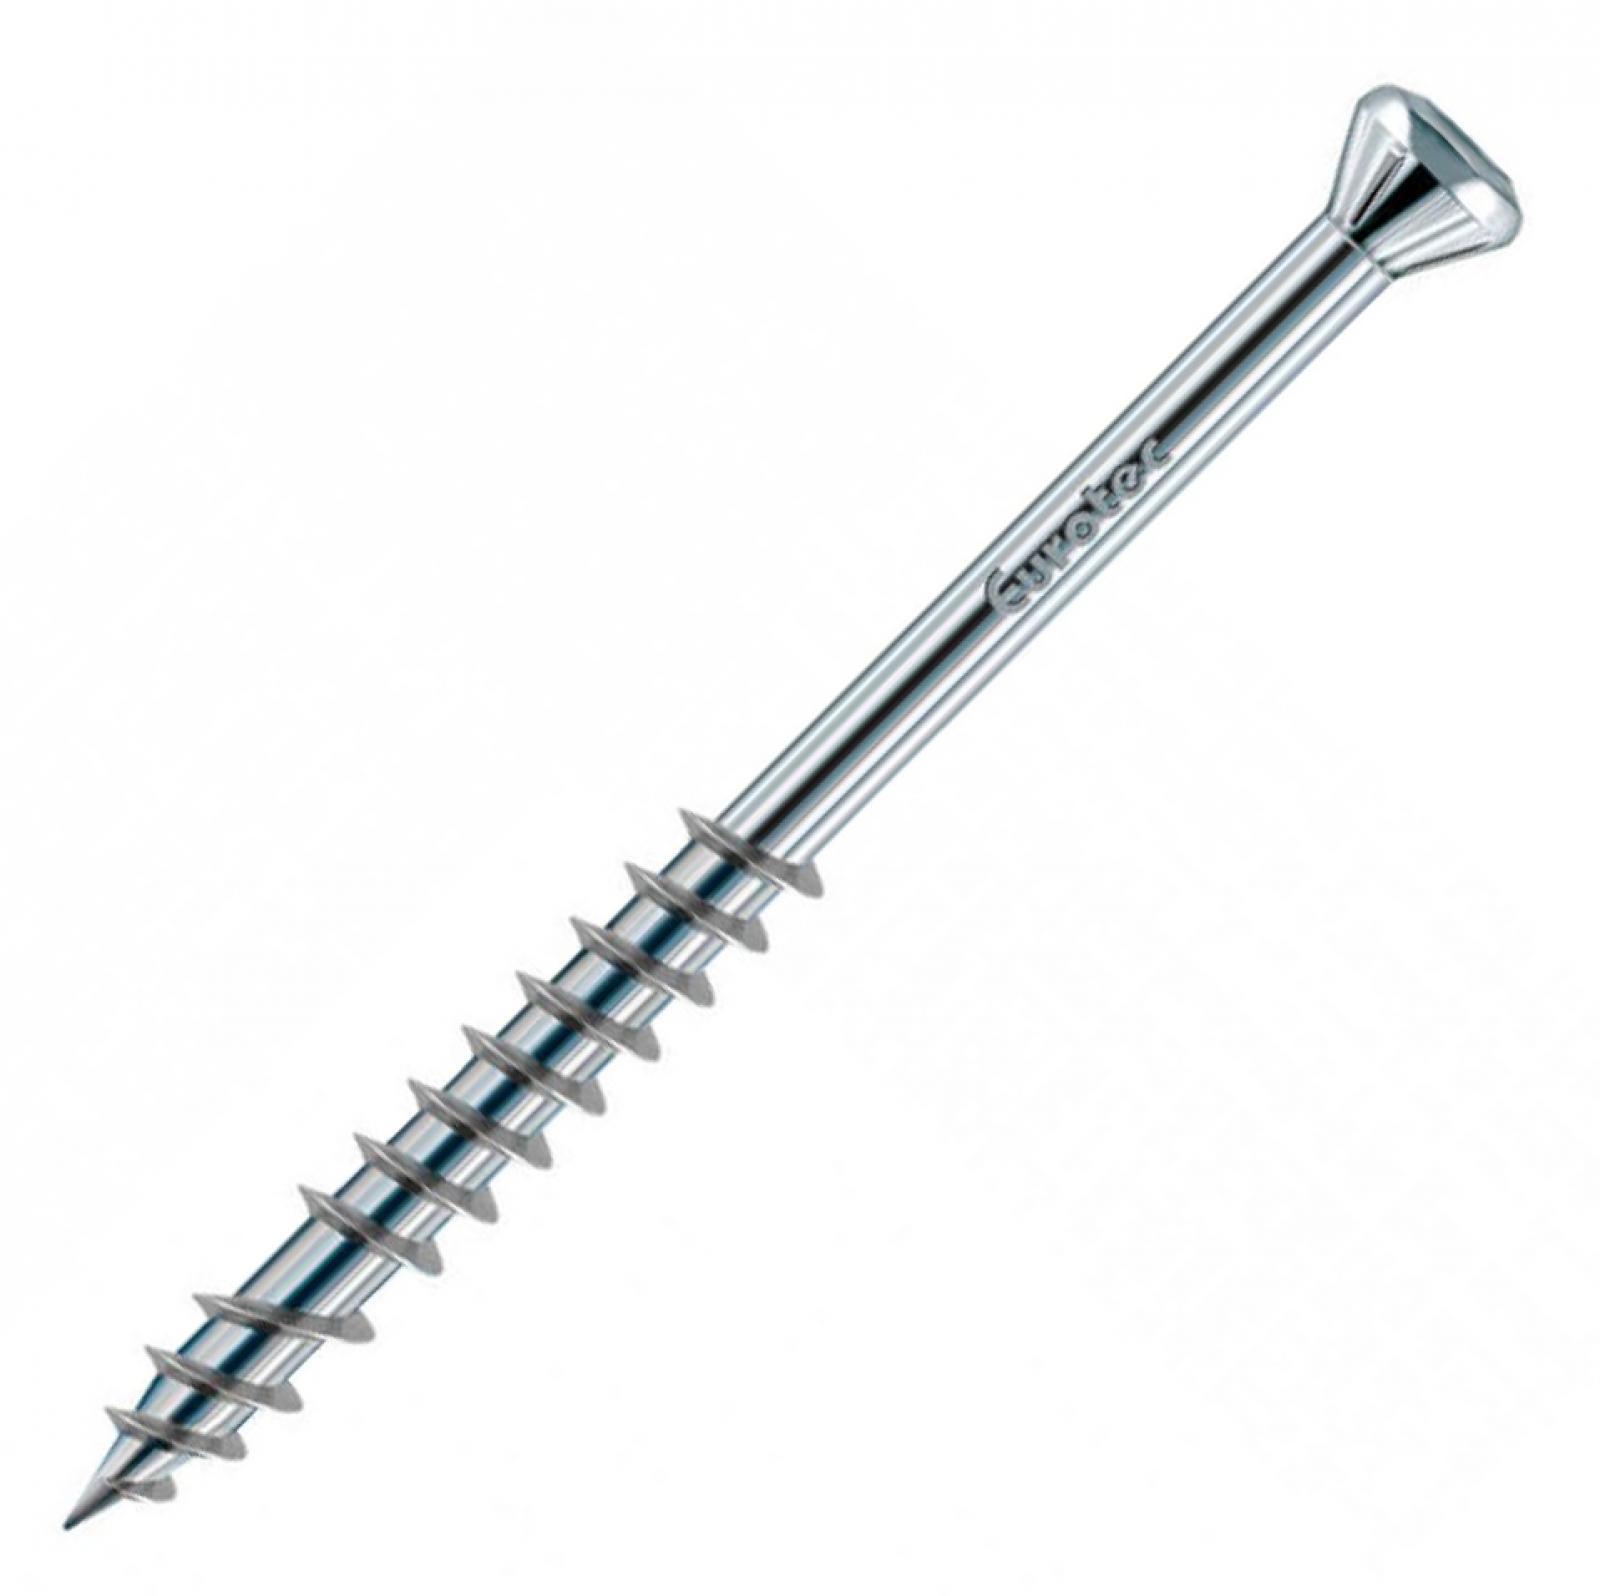 Decking screw 5,0 mm, stainless steel A4, (200 pcs.) EUROTEC Hapatec